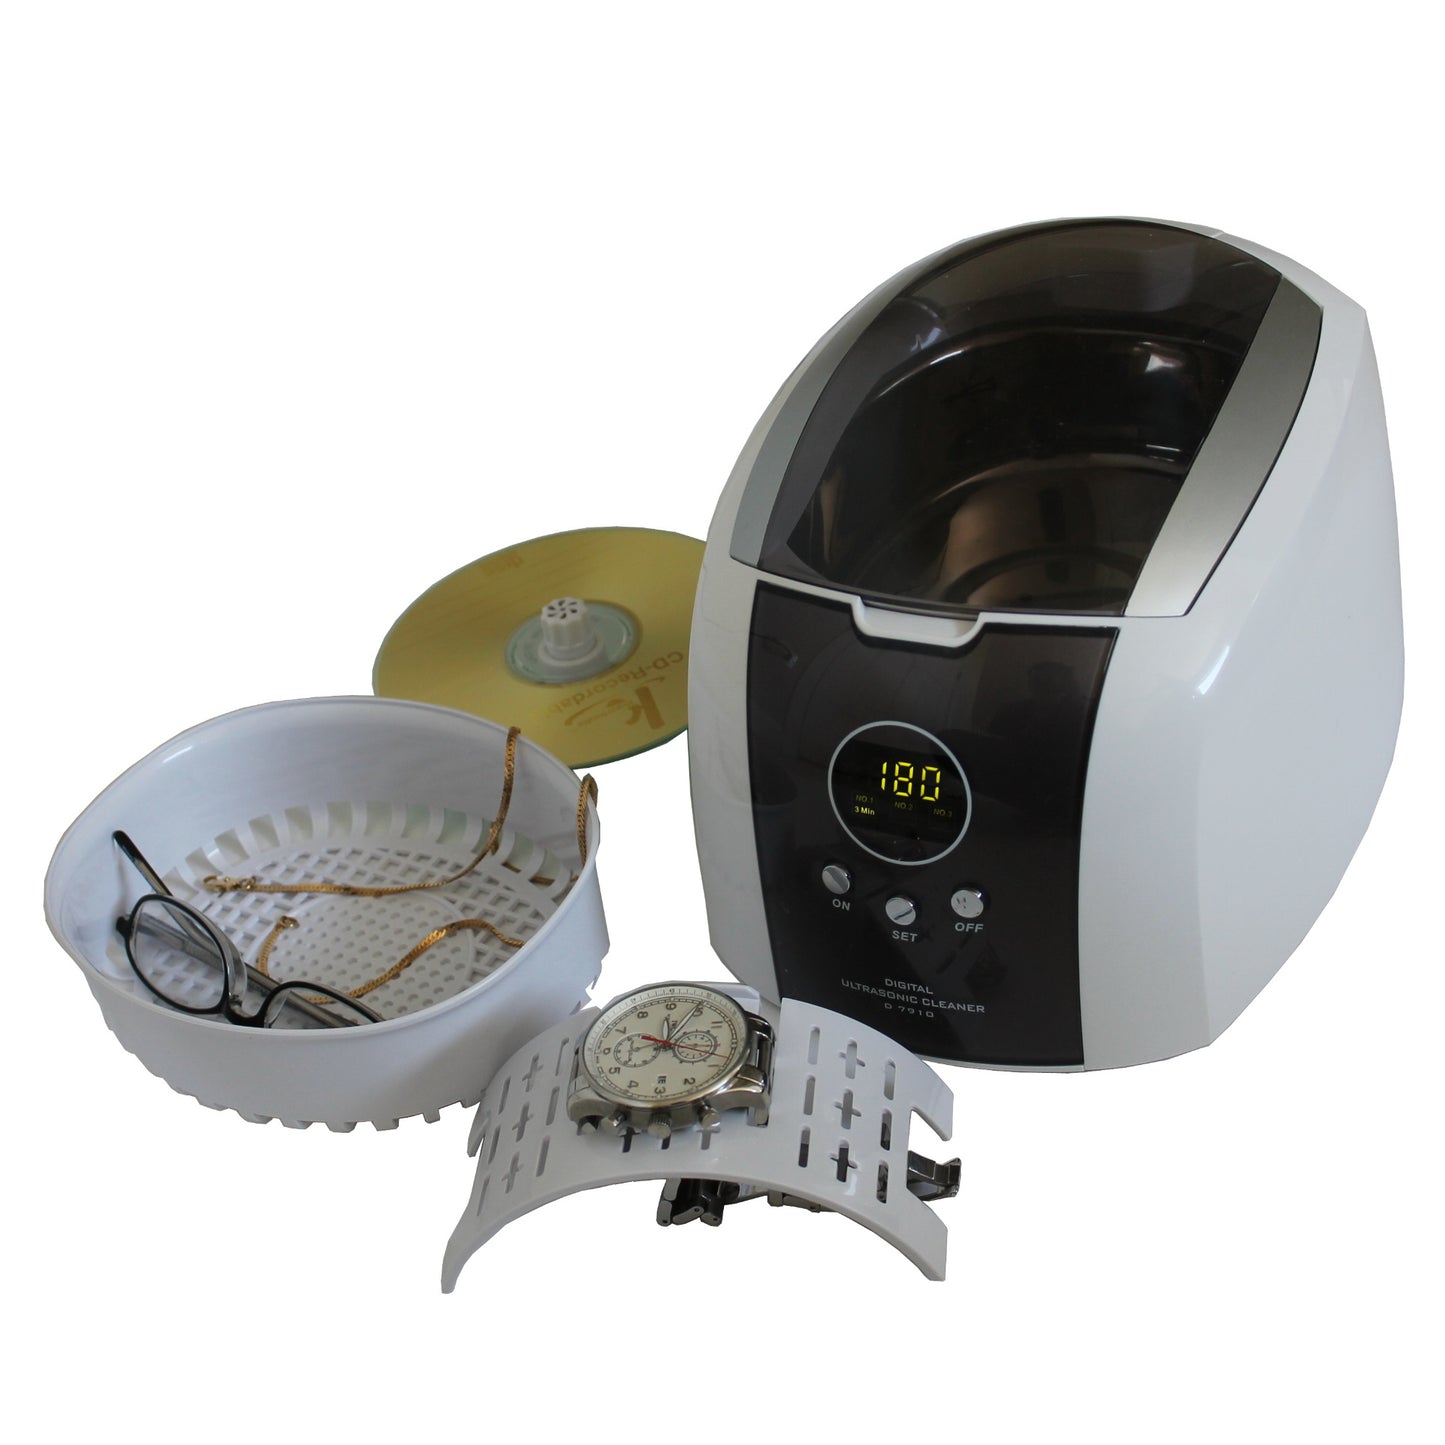 D7910B+CSGJ01 | iSonic® Digital Ultrasonic Cleaner, with Jewelry/Eyewear Cleaning Solution Concentrate CSGJ01, 8OZ, Promotional Price!